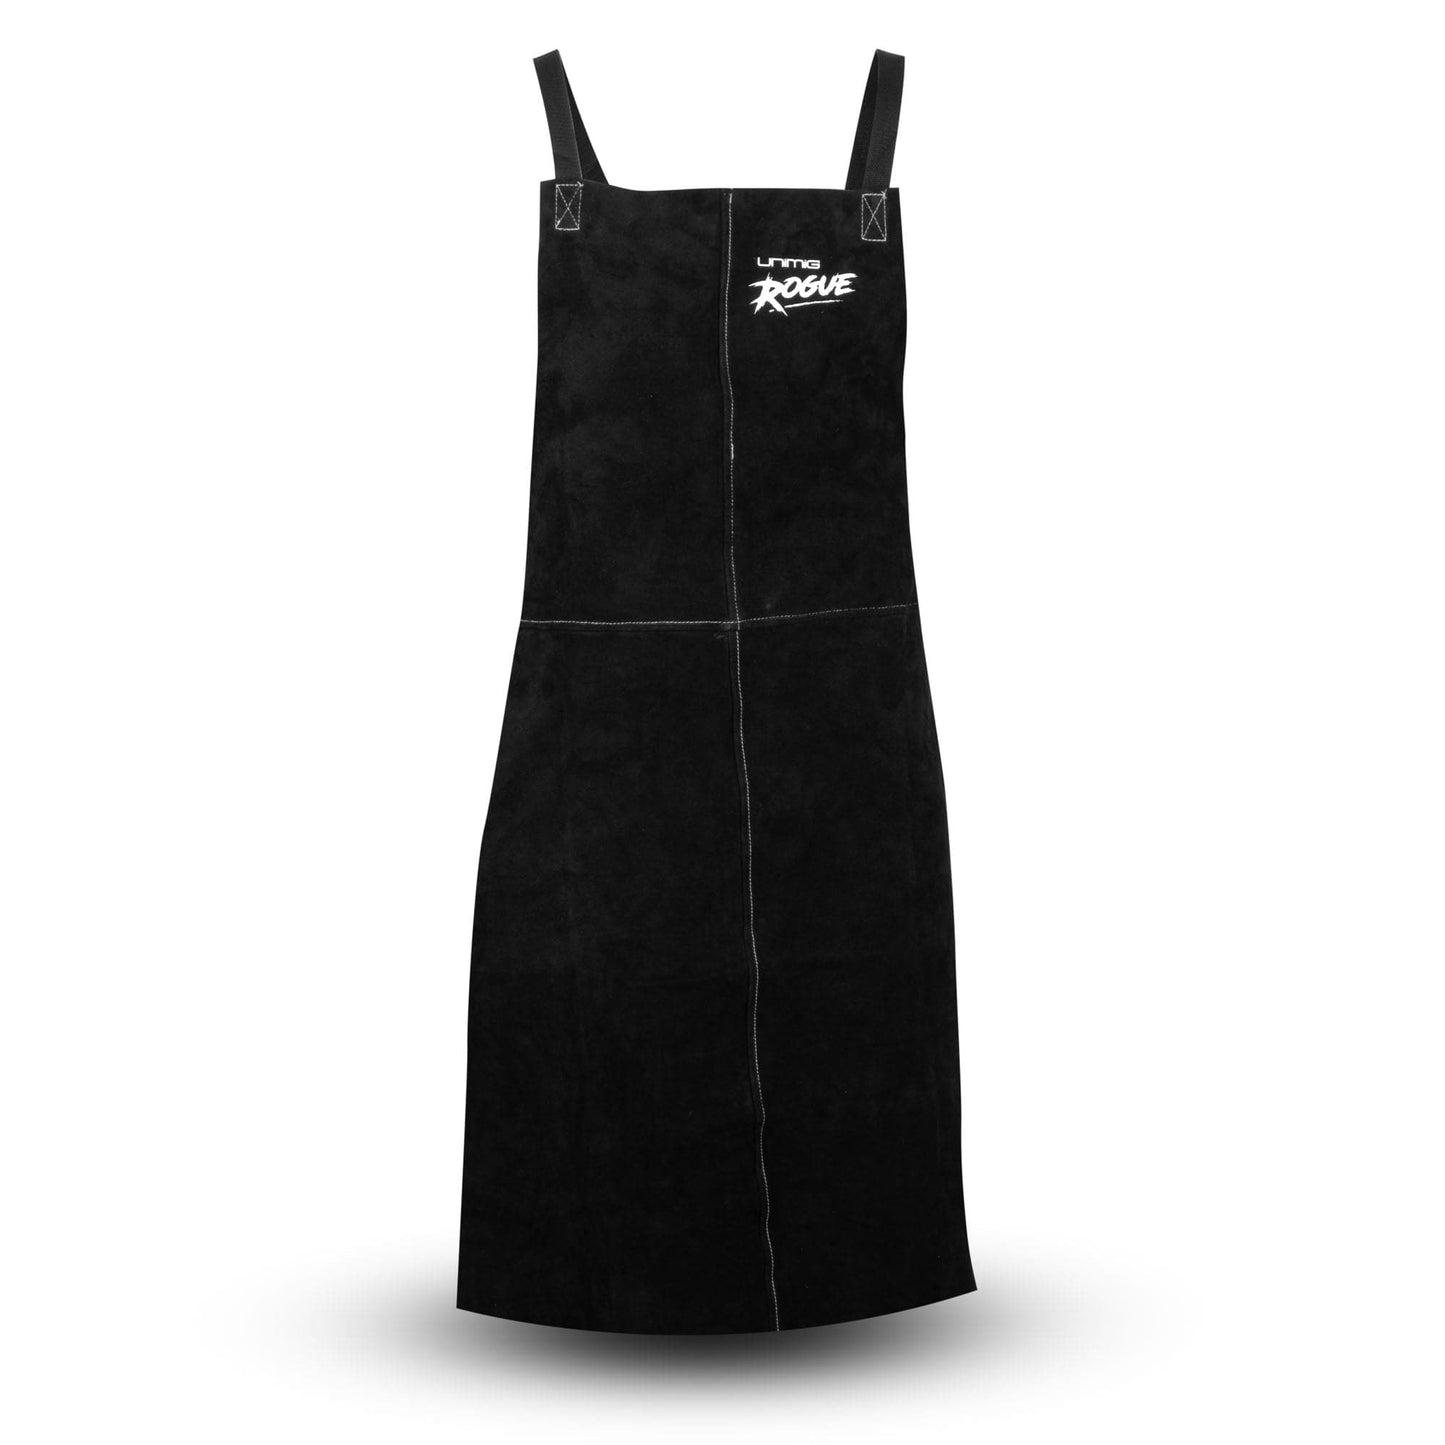 ROGUE Leather Apron - XA-44-7142 - A&S Welding & Electrical